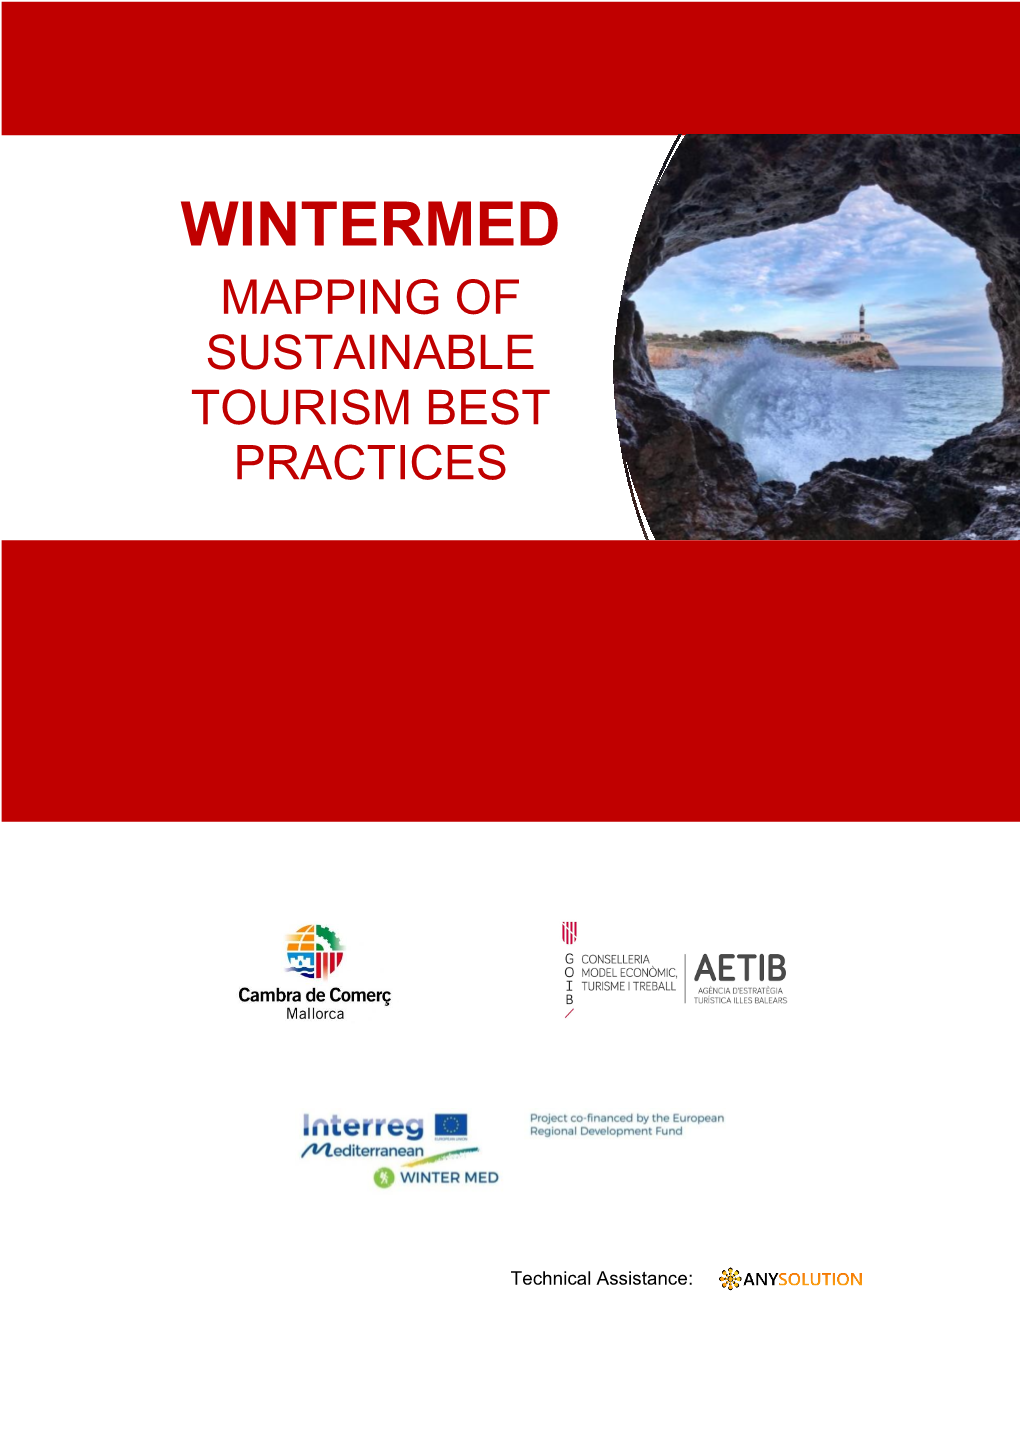 Wintermed Mapping of Sustainable Tourism Best Practices